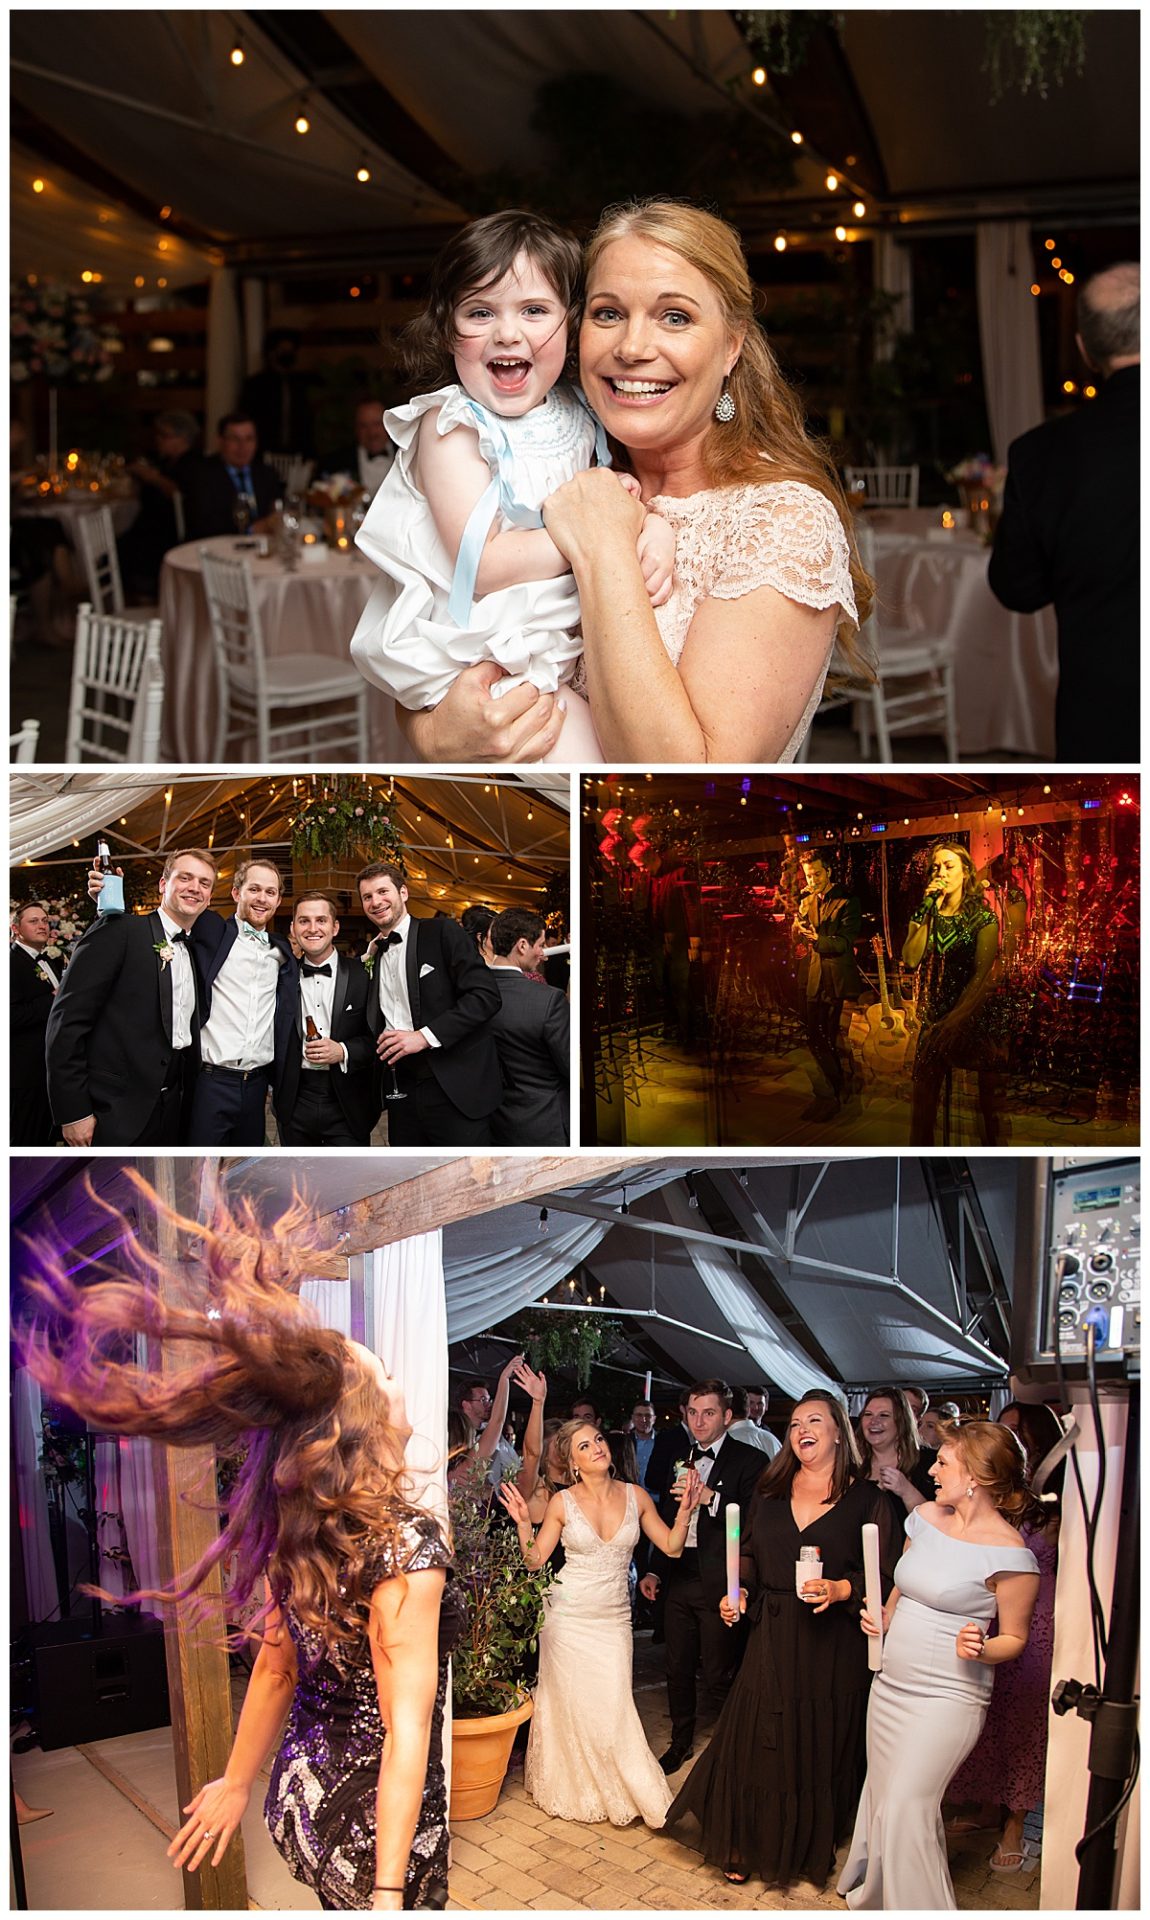 older woman with tiny toddler and groomsmen photos dancing at wedding reception